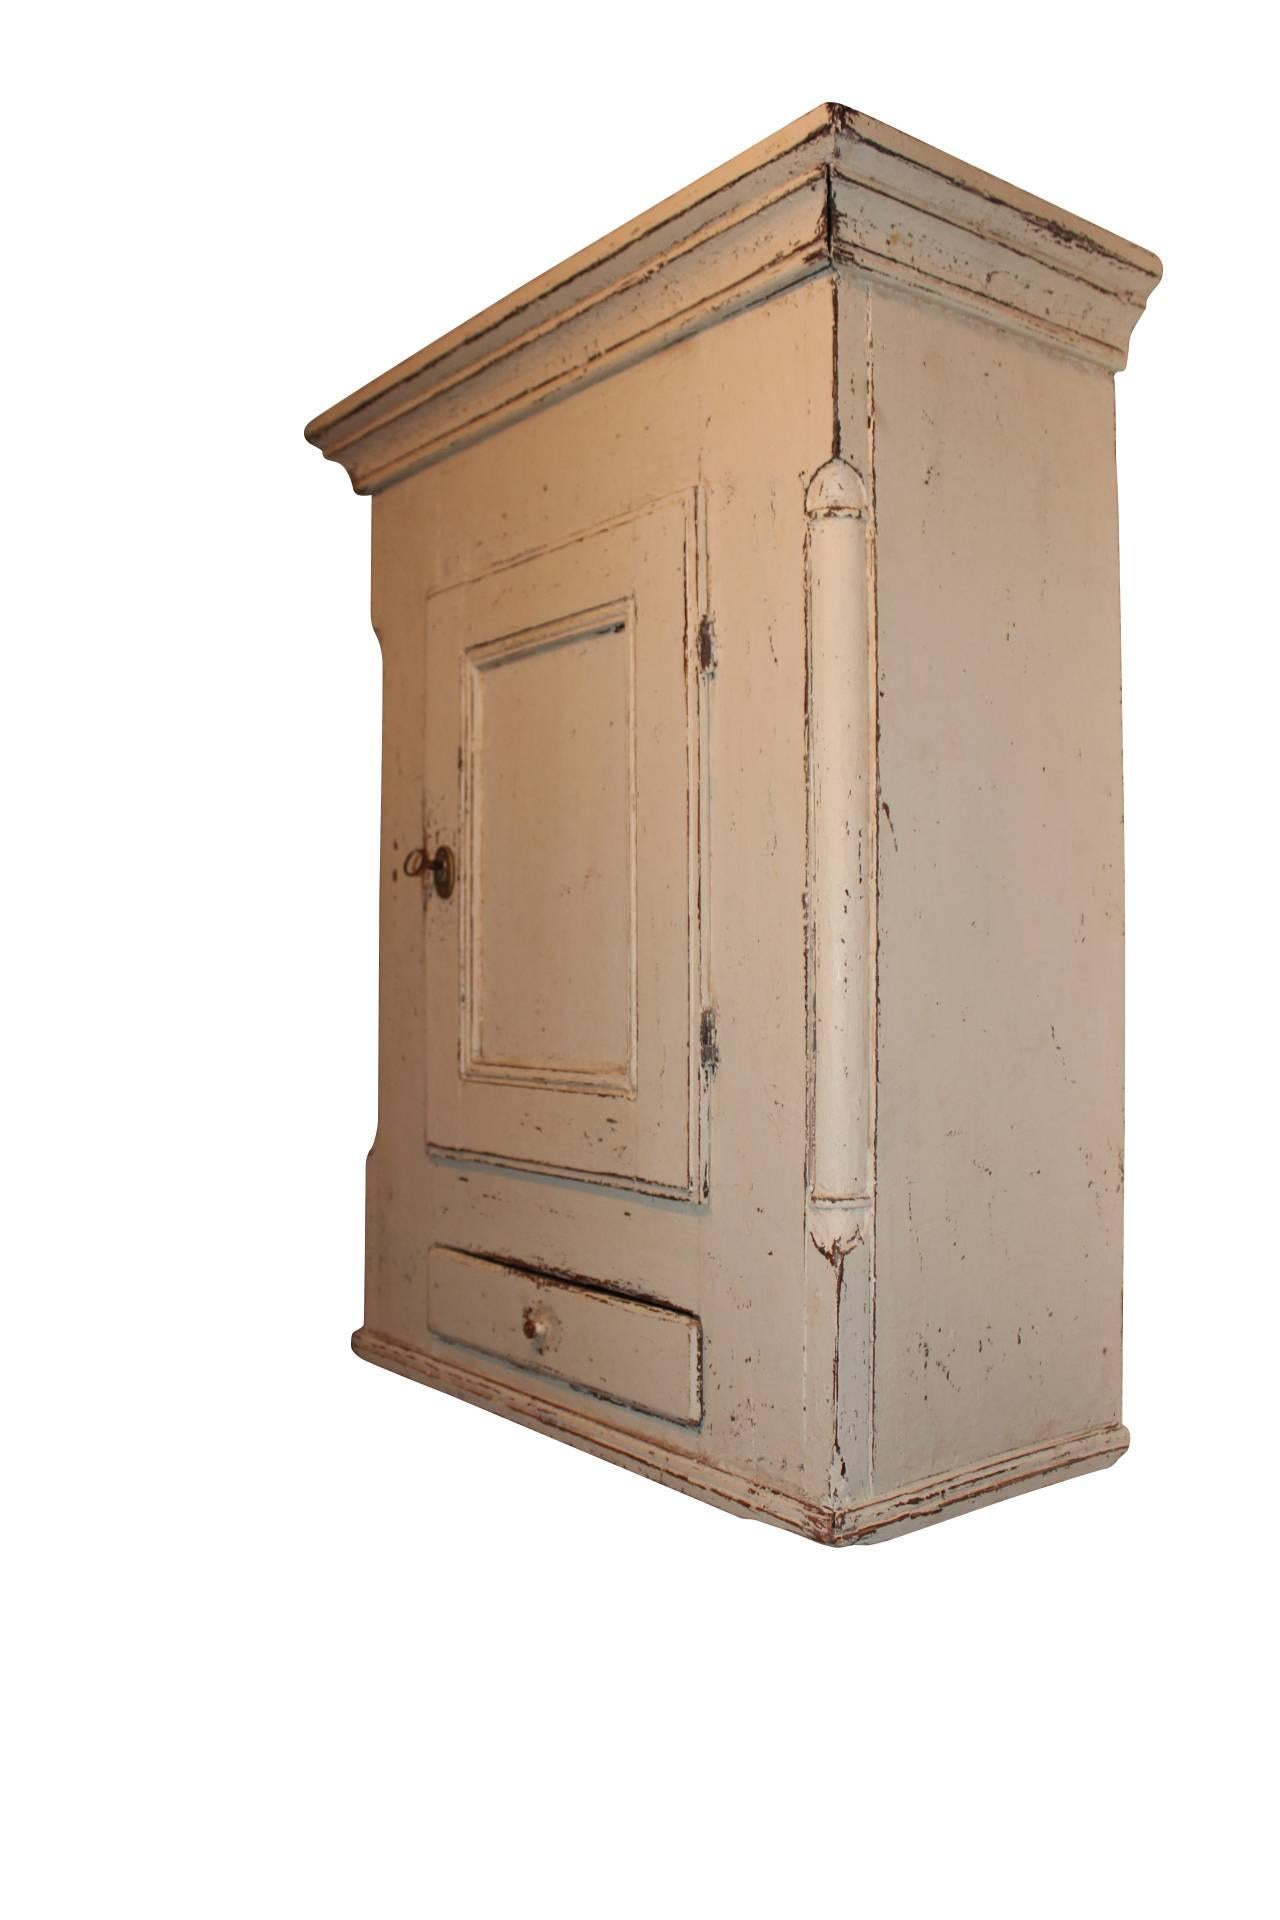 The grey painted antique Gustavian style wall cupboard from Sweden, dating back to around 1860, is a captivating piece that reflects the elegance and craftsmanship of the Gustavian era.

The Gustavian style originated in 18th-century Sweden during